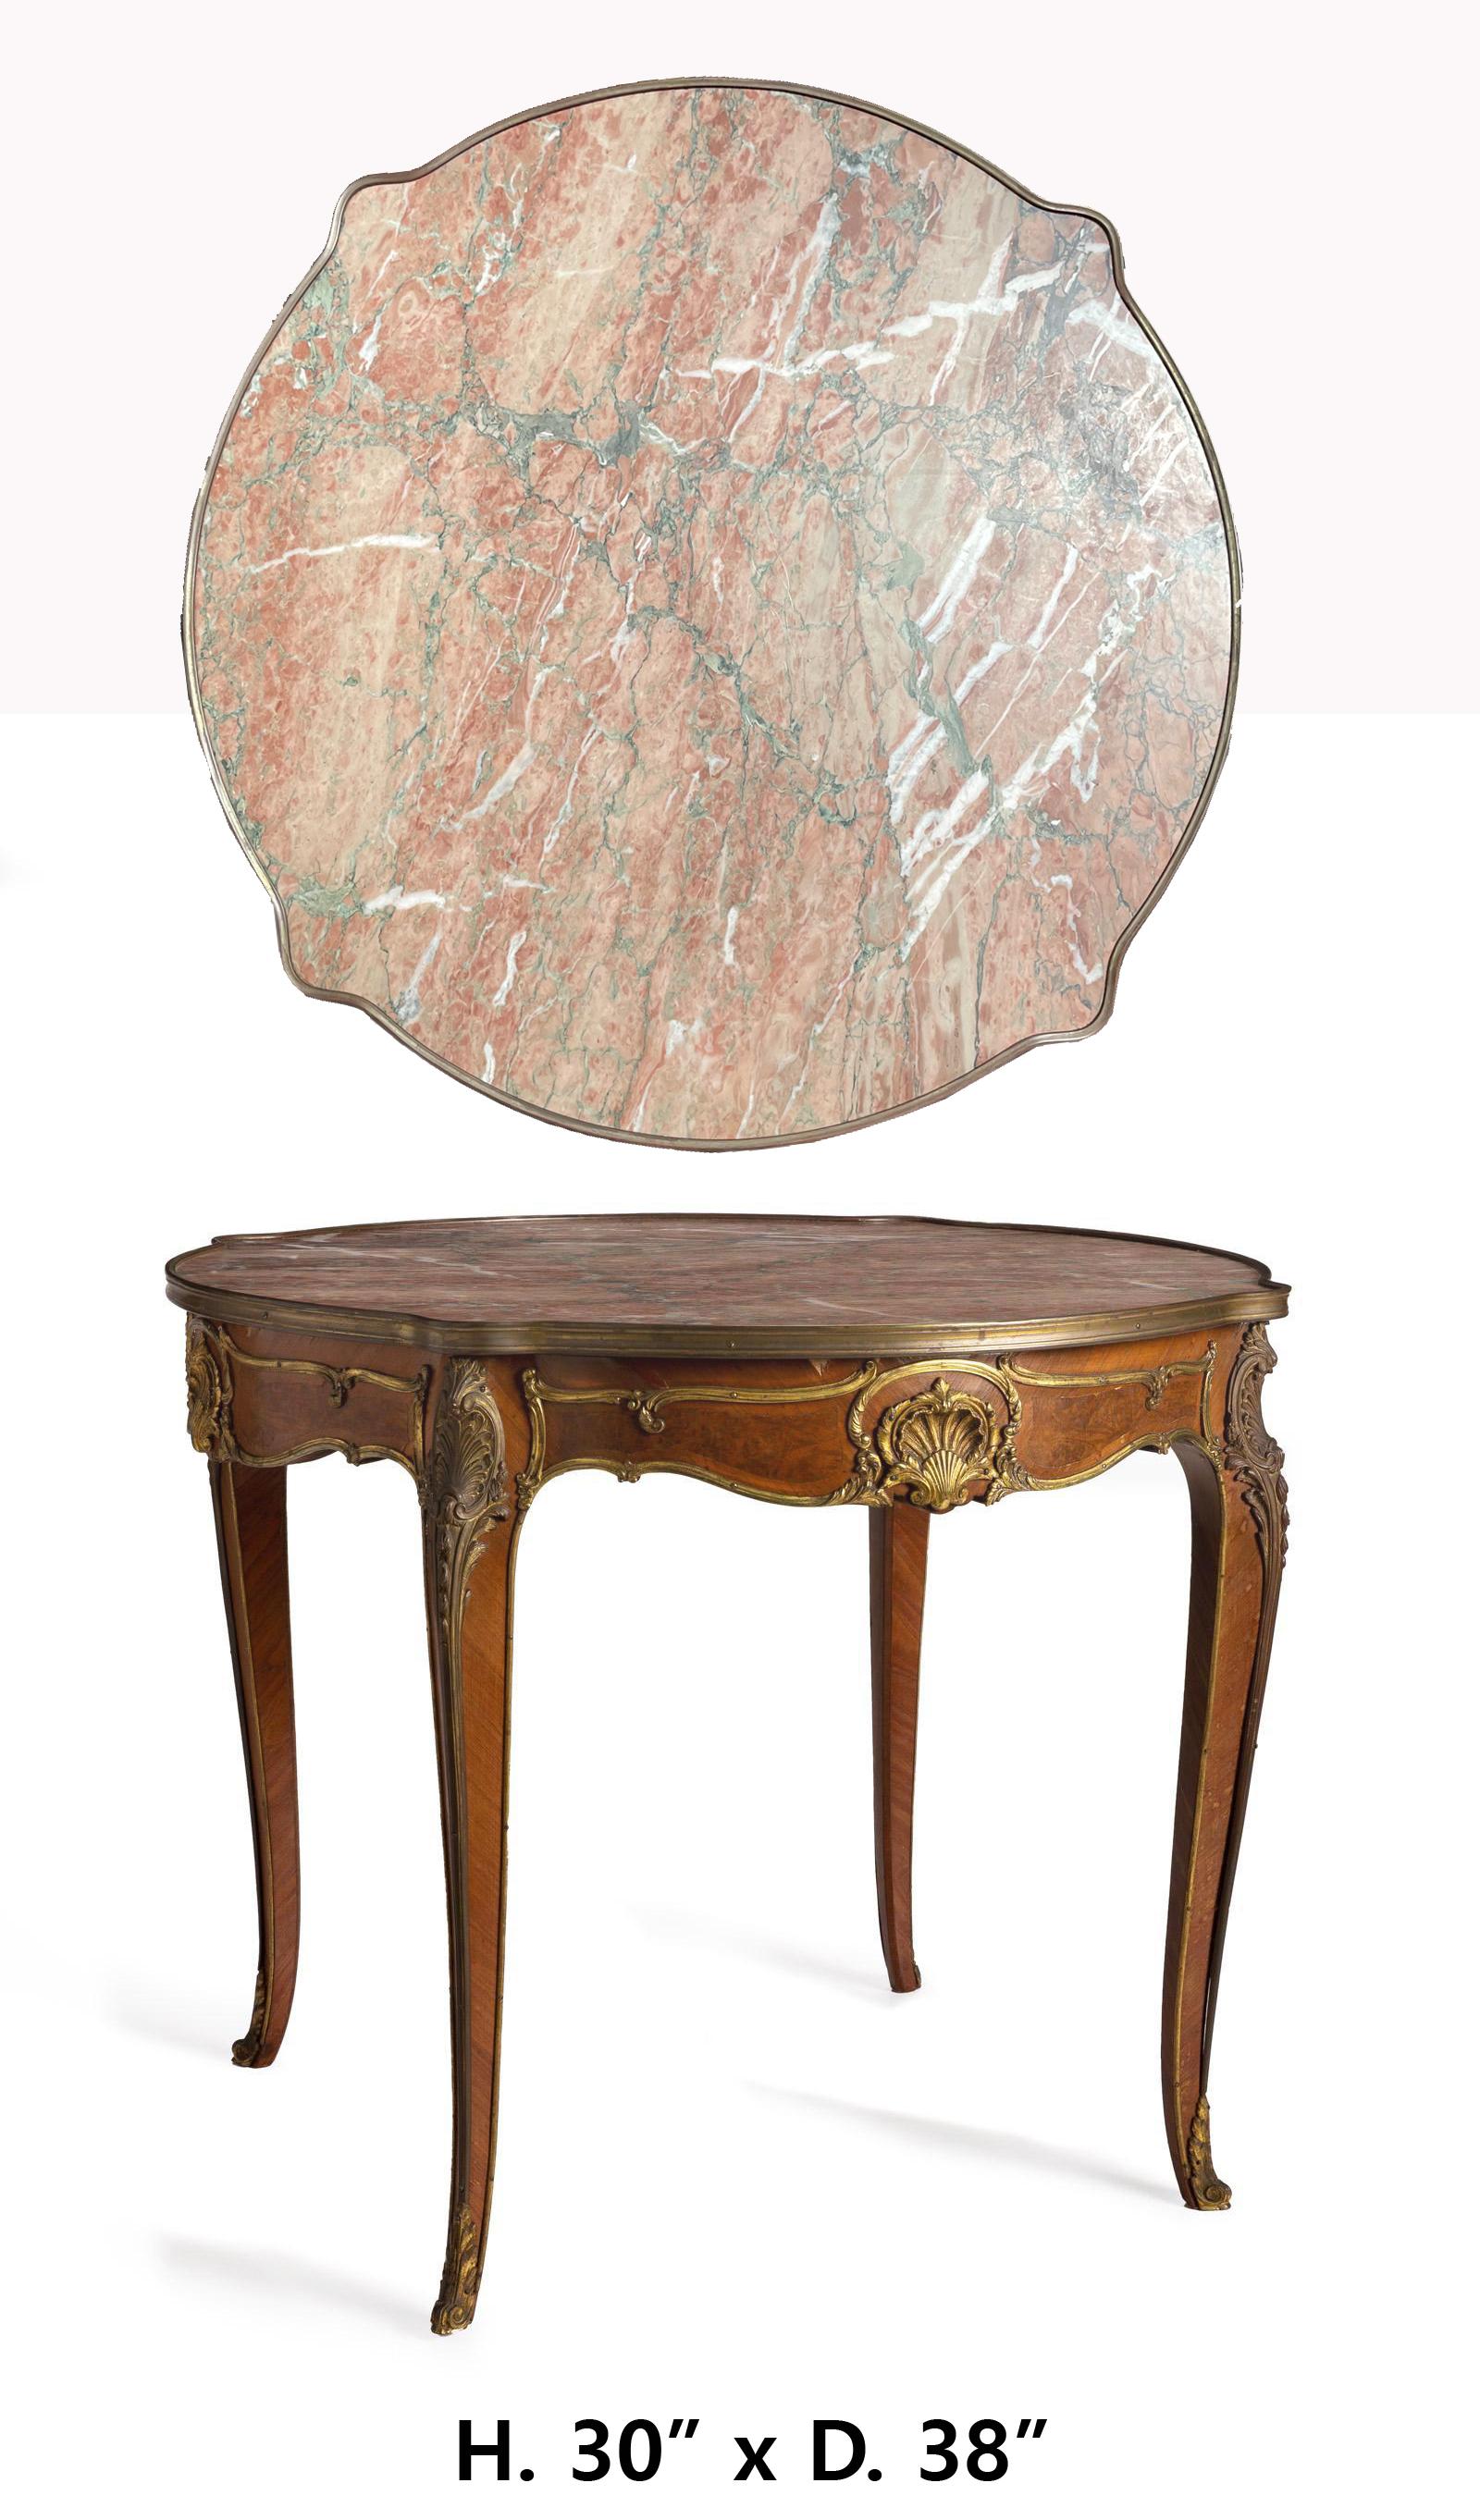 Beautiful 19c French Louis XV-style table gilt bronze mounted center table
circa 1900
The round table with inset pink and grey marble top over a shaped apron with rocaille motif gilt-bronze mounts, raised on four cabriole legs with sabots to the